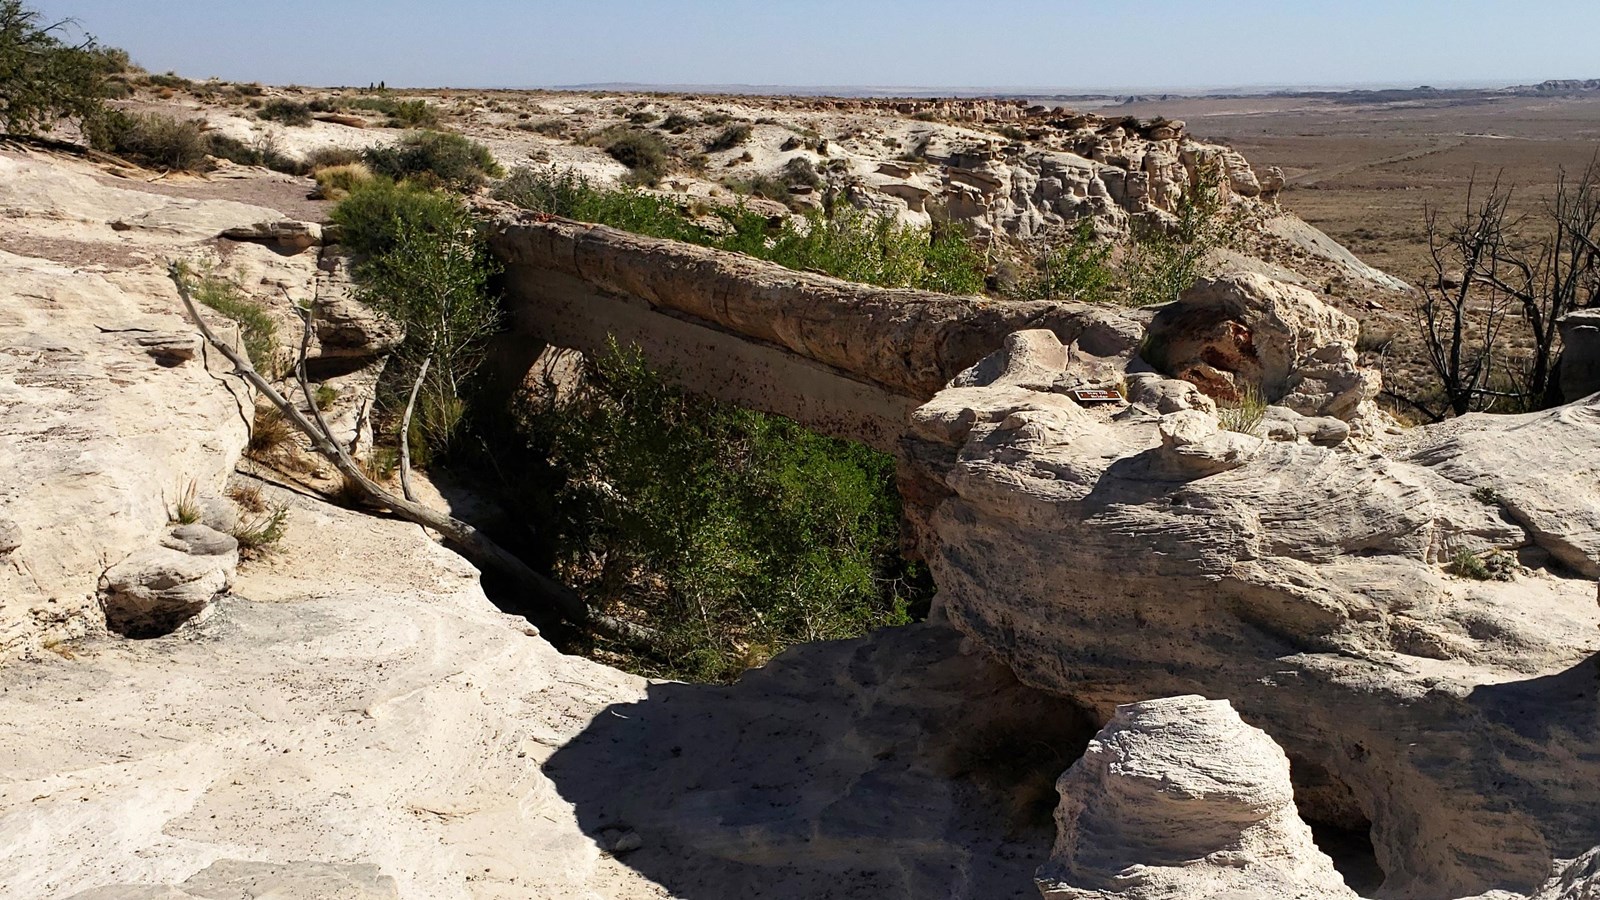 A large petrified log spans a pale sandstone gully with grasslands in the distance.